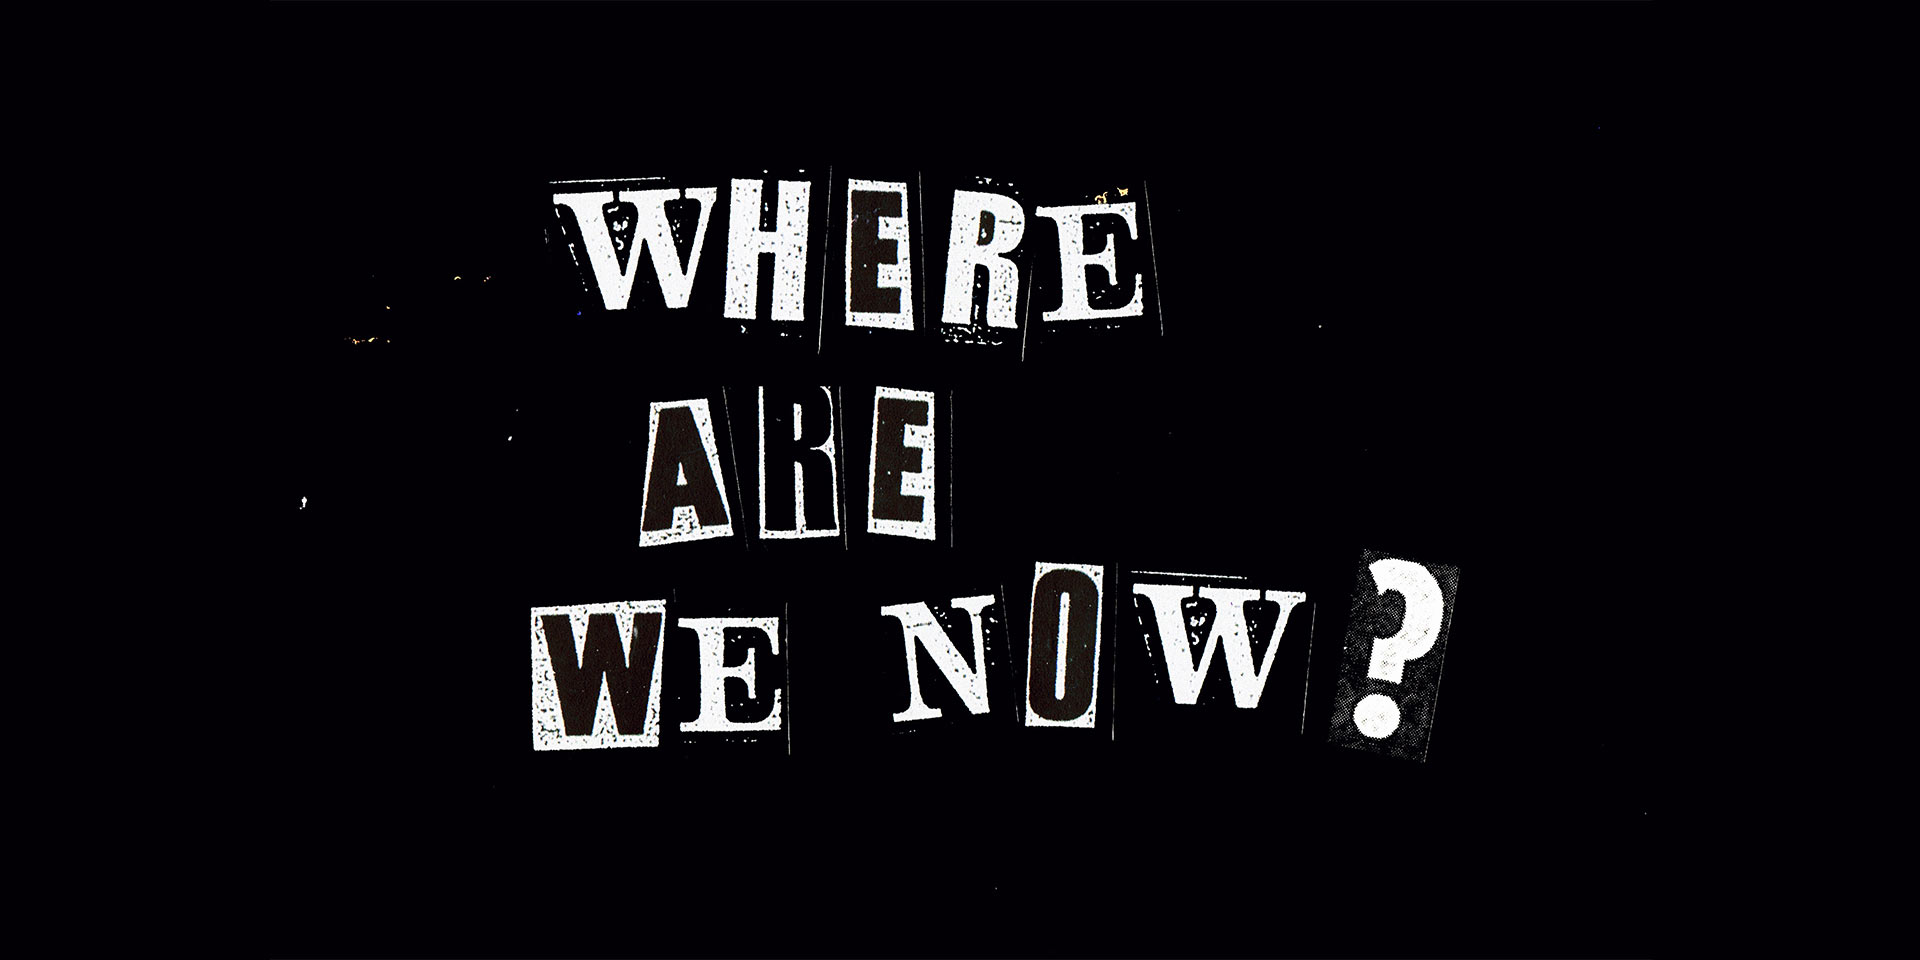 Where is my mind текст. Where are we. Надпись where. We are Now. Where a we Now.